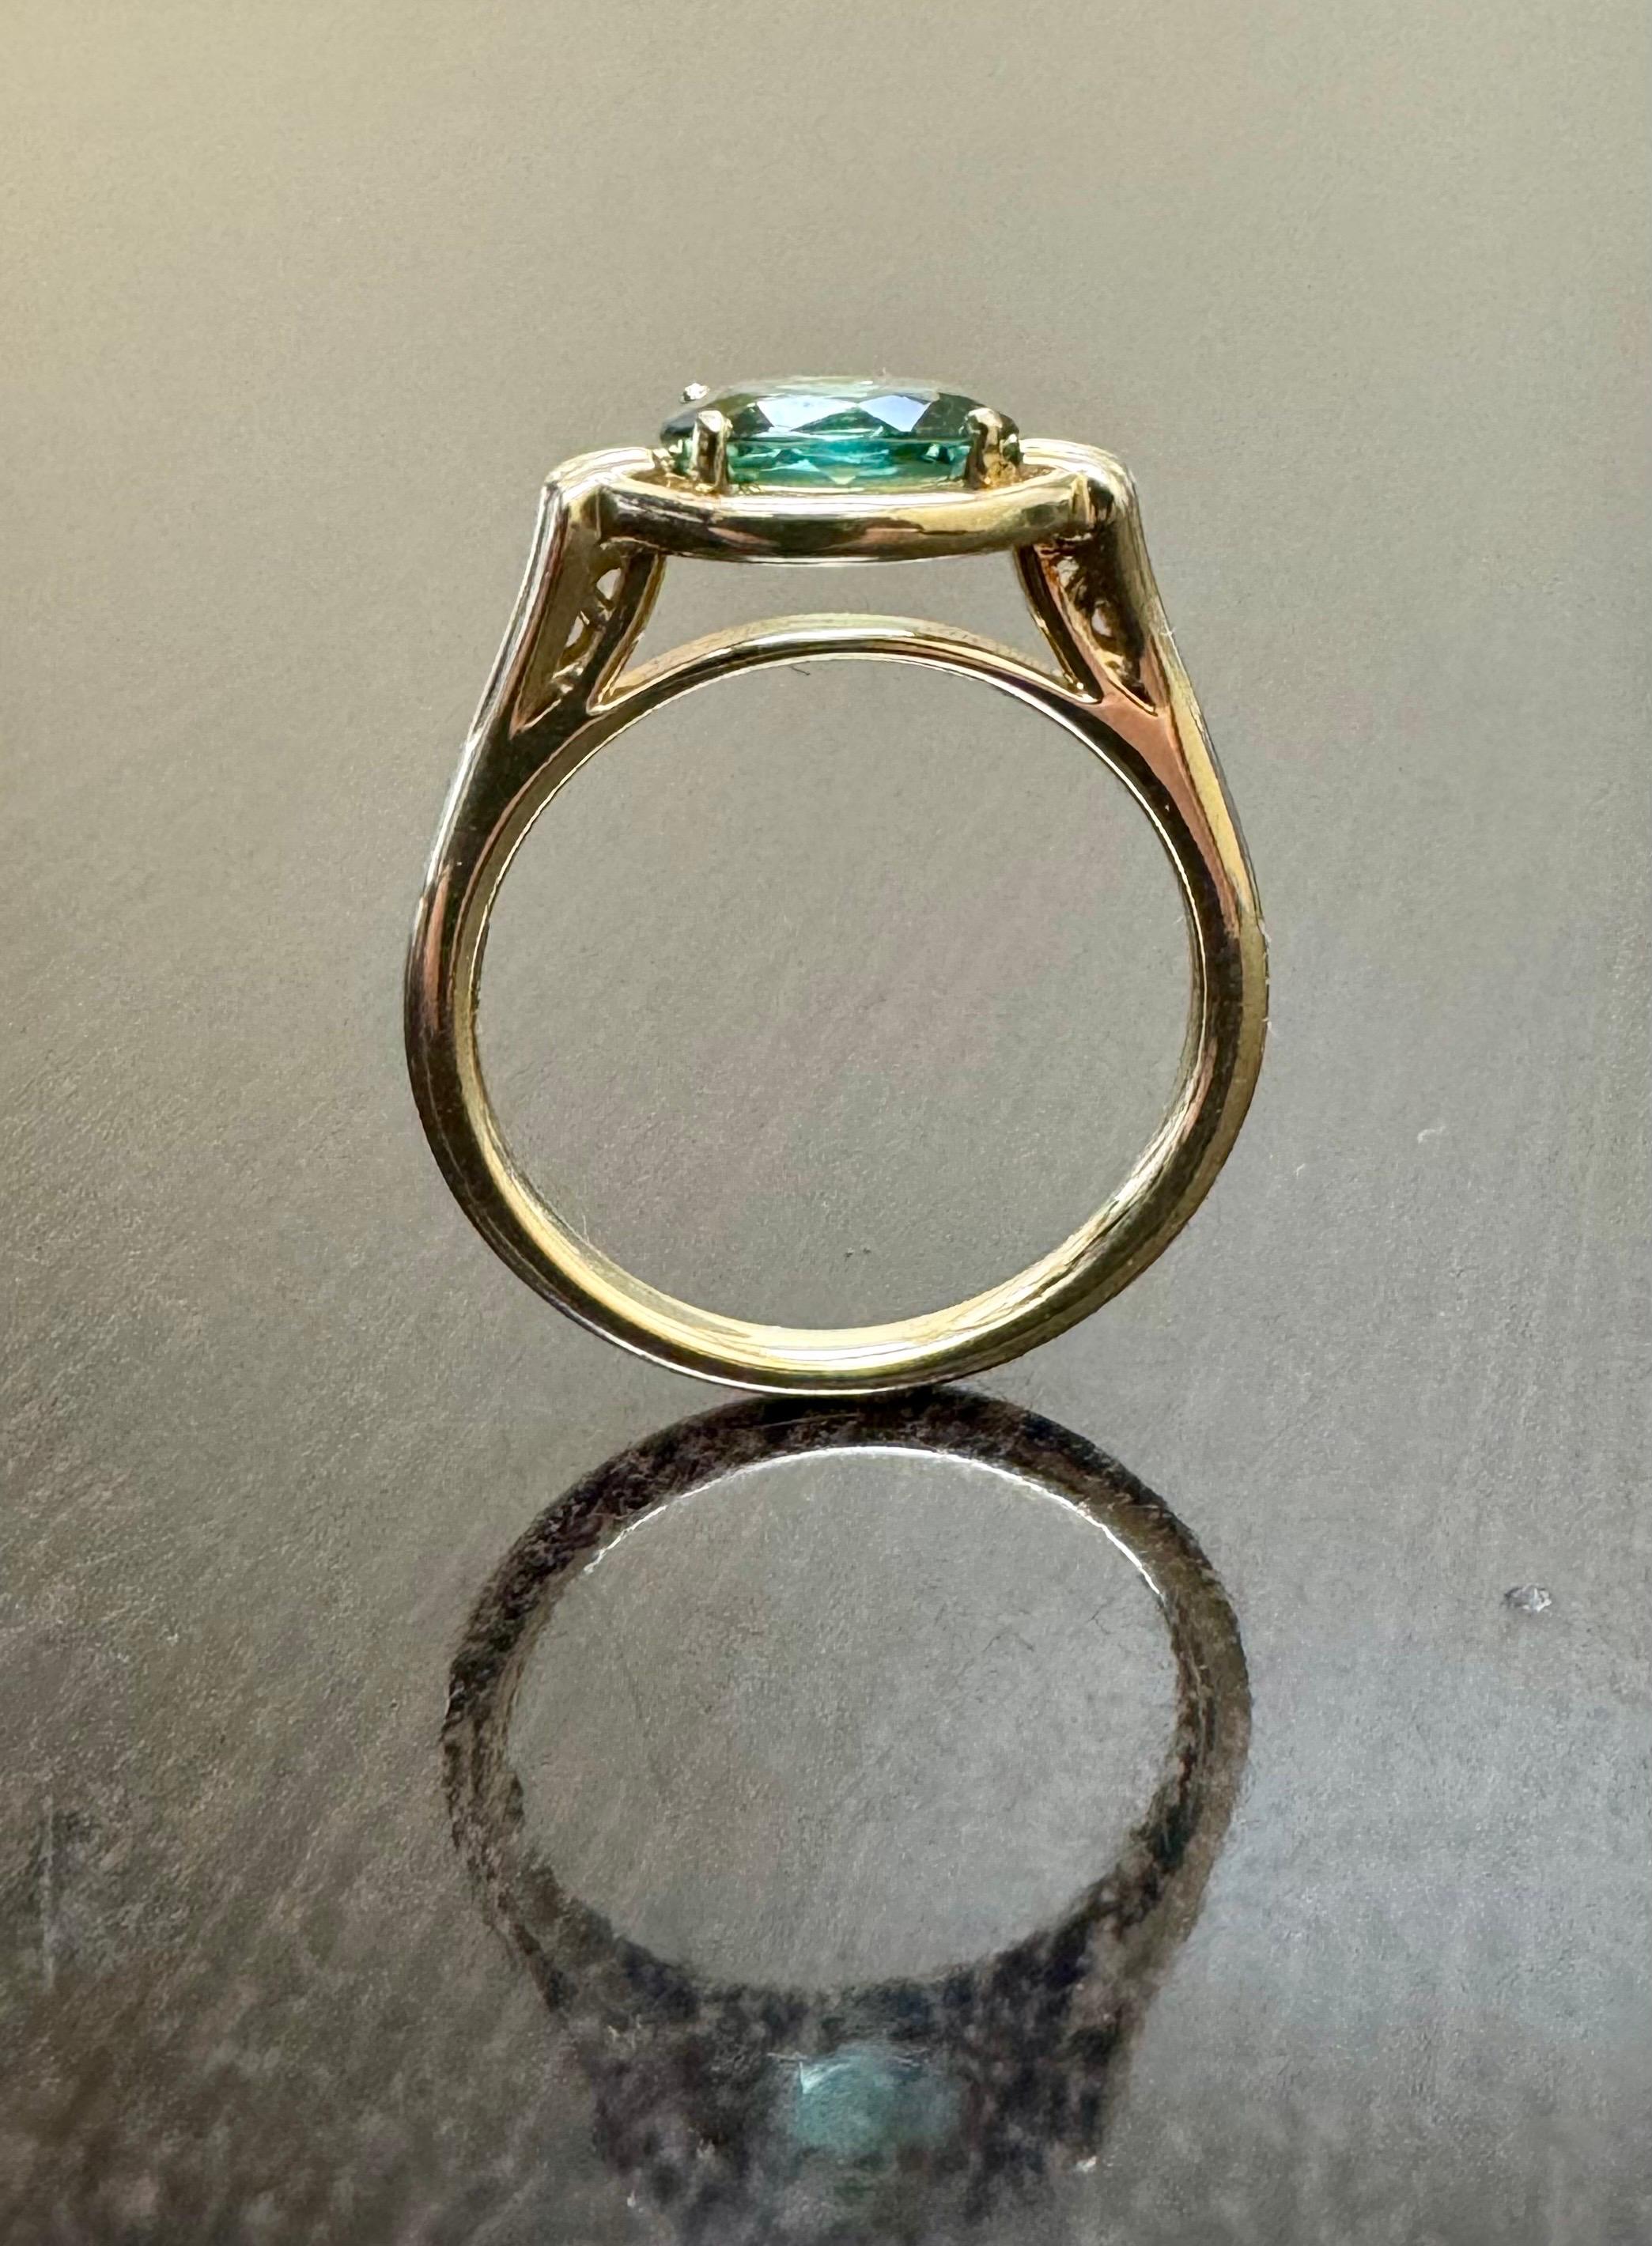 DeKara Designs Collection

Our latest design! An Elegant and Lustrous Oval Teal Tourmaline Handmade in 14K Yellow Gold.

Metal- 14K Yellow Gold, .583.

Stones- Genuine Oval Blue Green Tourmaline 1.38 Carats.

Size- 6 1/2.  FREE SIZING!!!!

Latest of